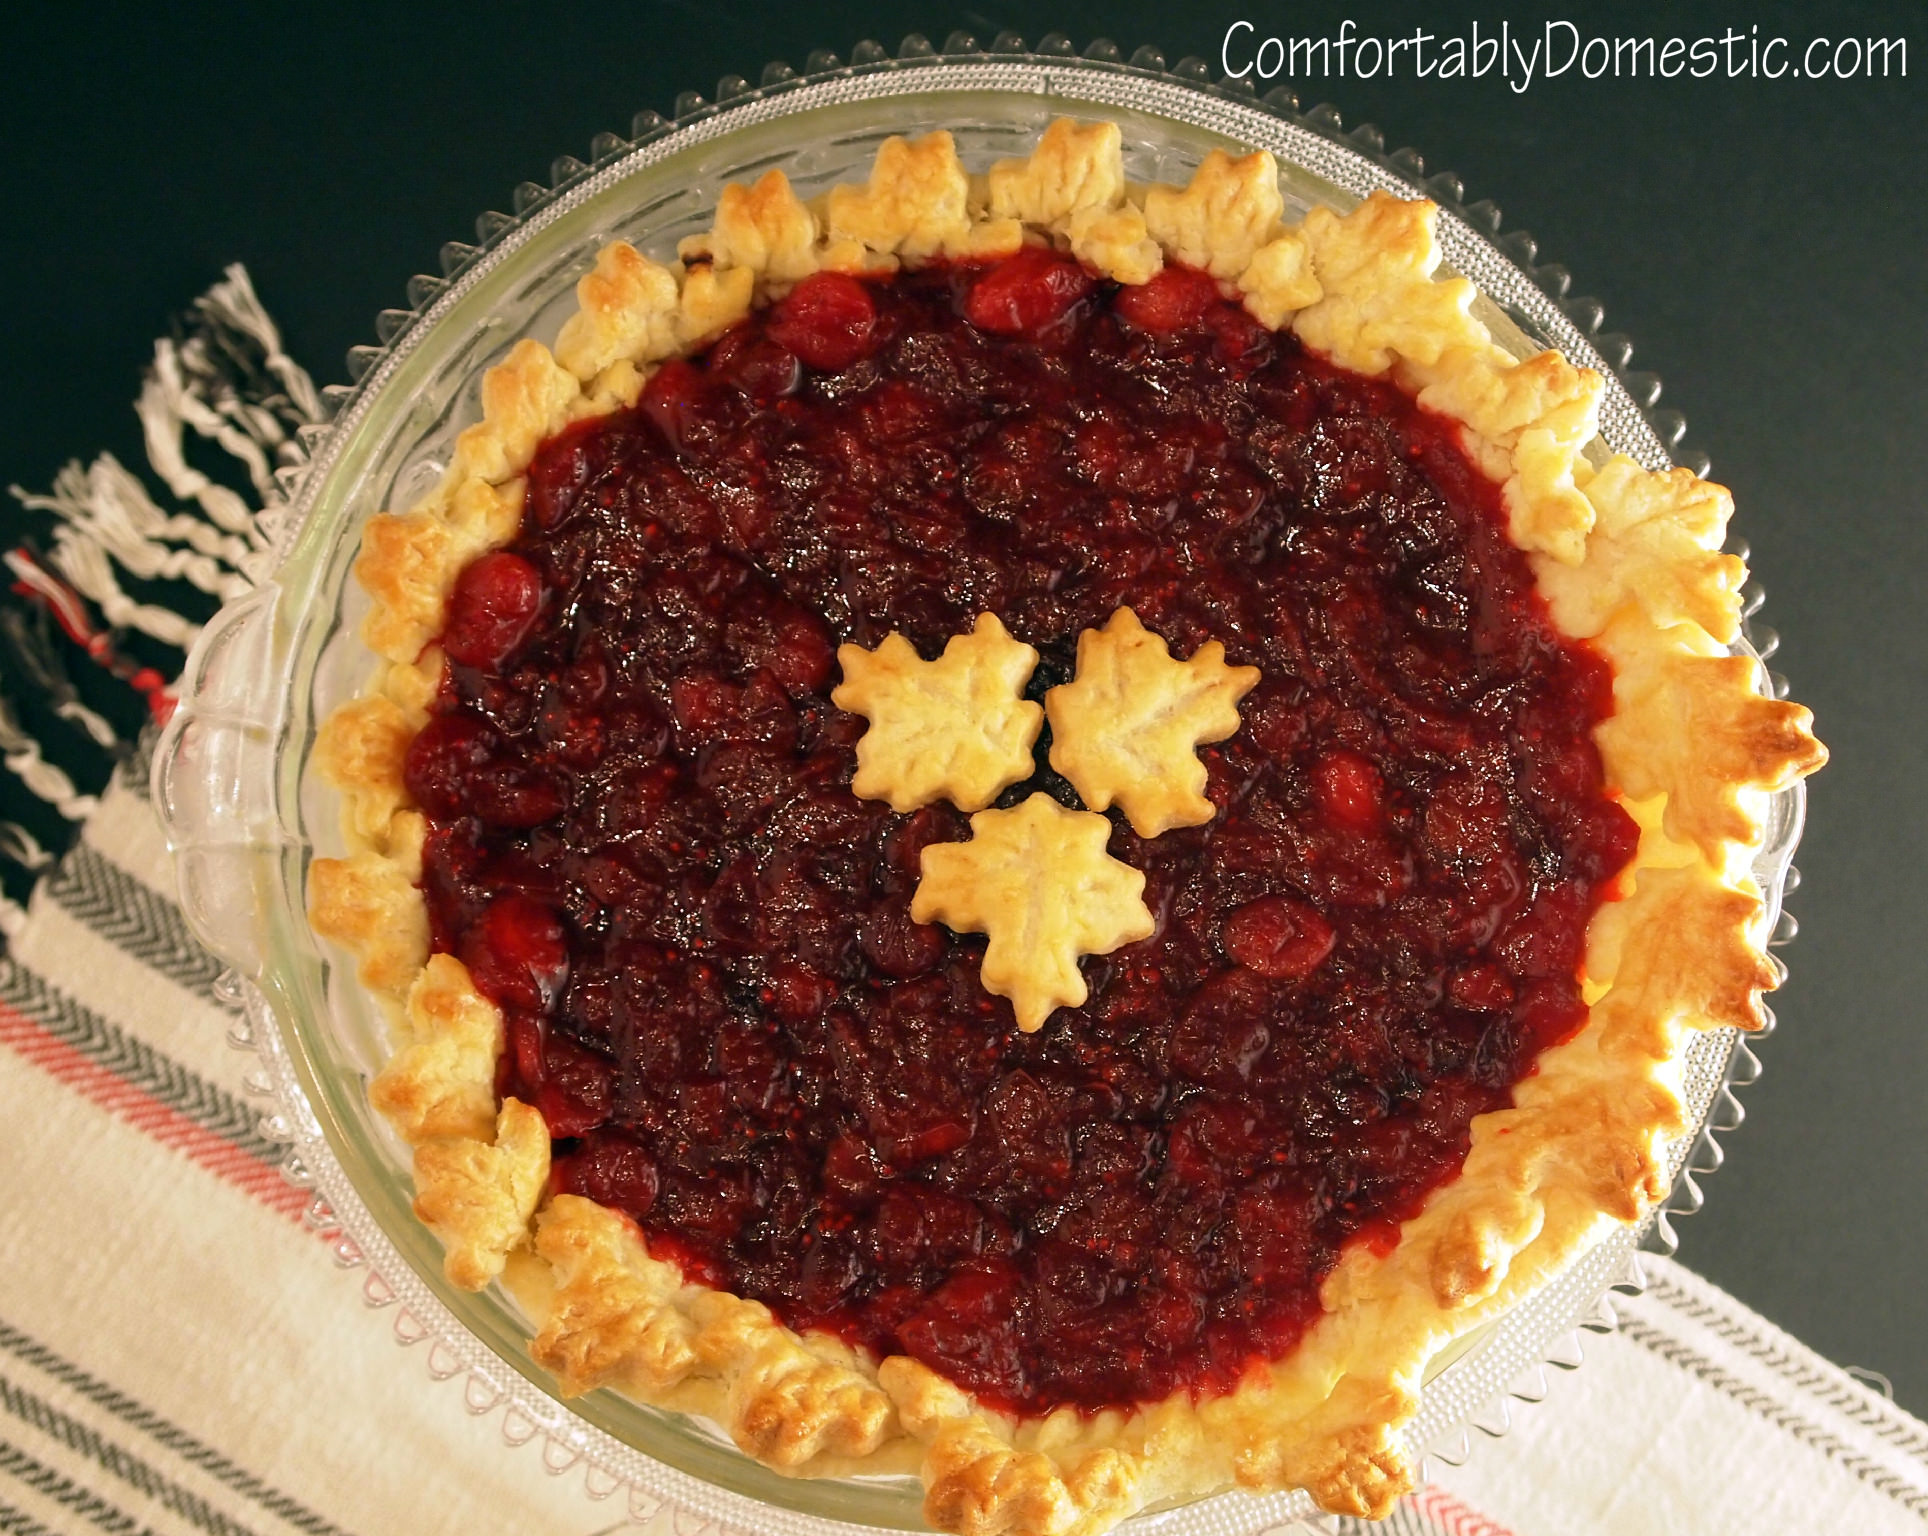 Dark chocolate cranberry pie may become your new favorite holiday pie recipe! Dark chocolate pie, topped with tart, fresh cranberry sauce, all baked into a flaky pie crust. | ComfortablyDomestic.com